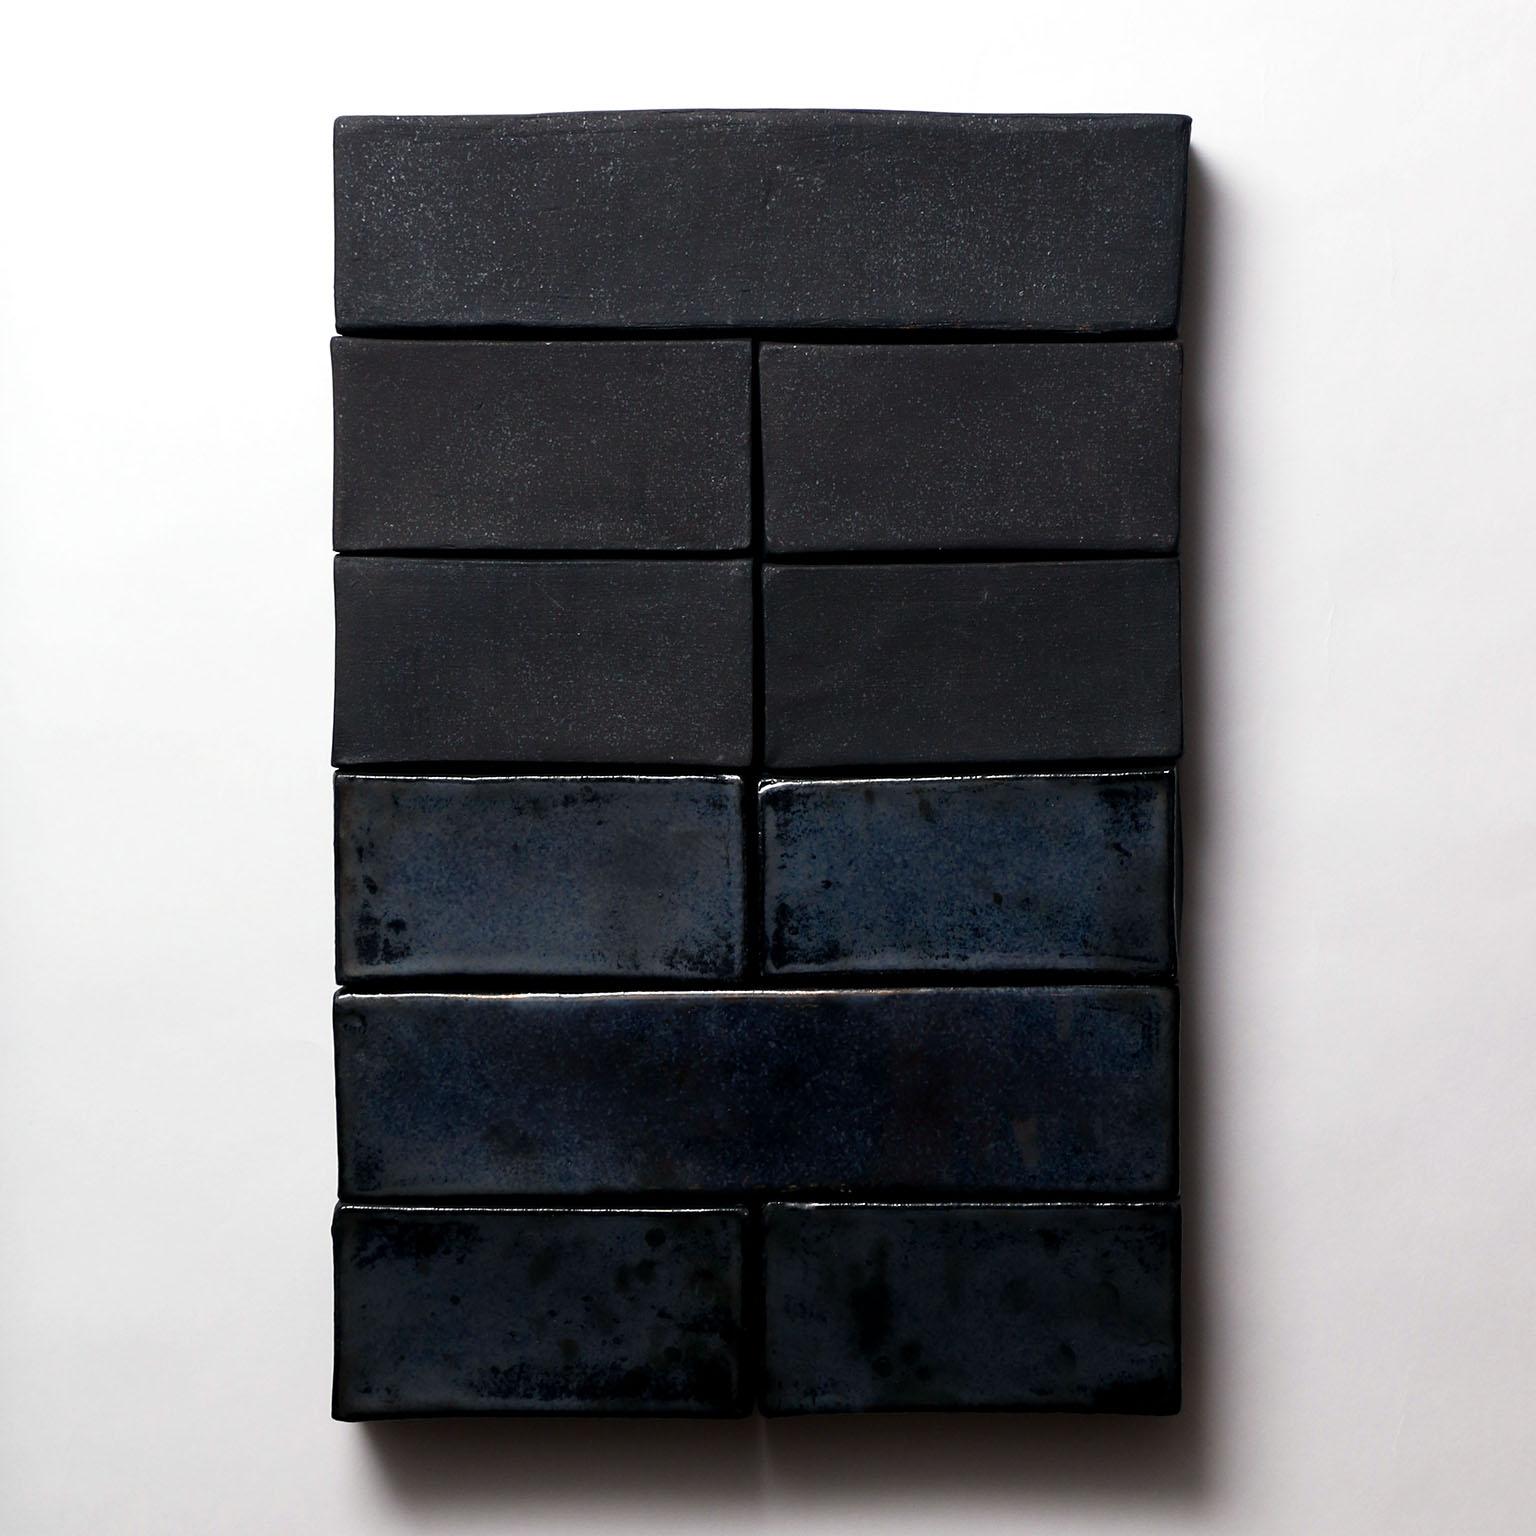 Based on the I Ching, an ancient Chinese divination text, this one-of-kind ceramic wall sculpture is composed of handmade stoneware blocks. Each block is individually finished with either a metallic black matte finish or a glossy iridescent black